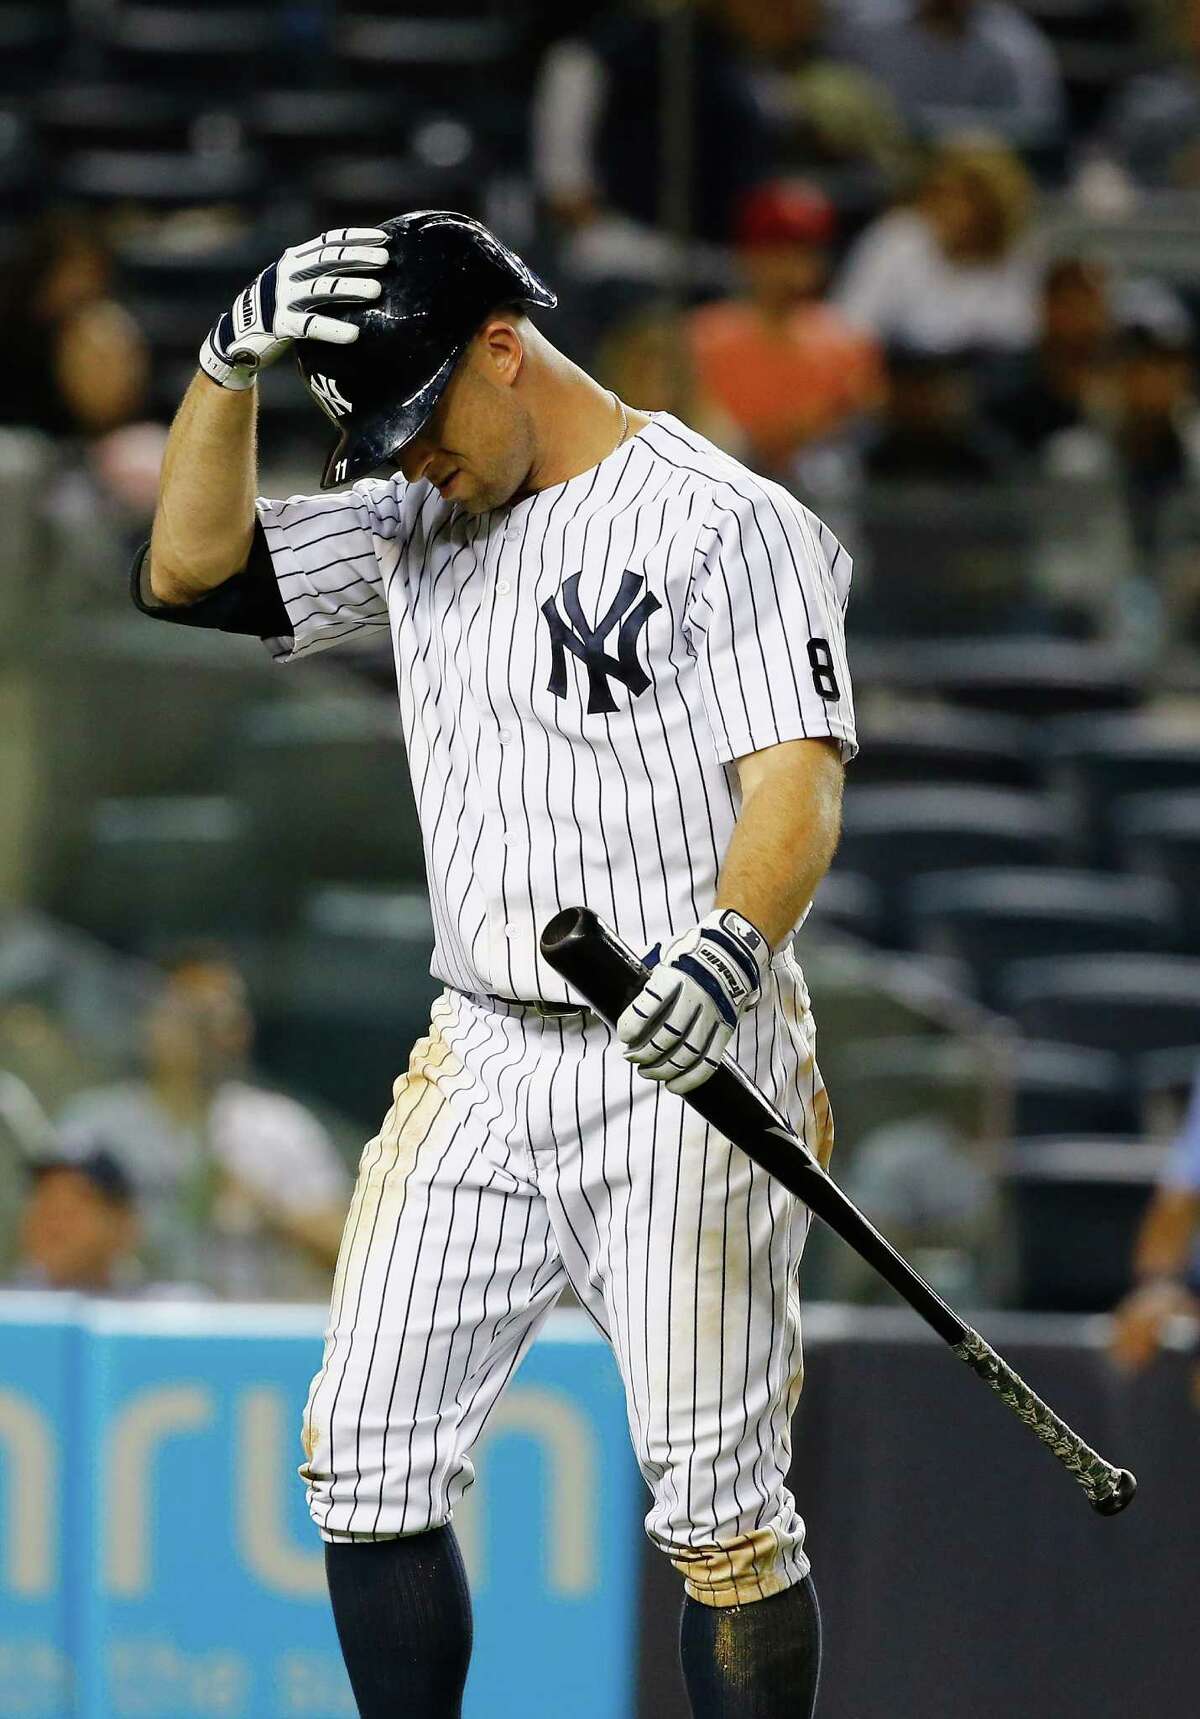 NEW YORK, NY - SEPTEMBER 28: Brett Gardner #11 of the New York Yankees looks on after striking out to end the game losing the Boston Red Sox 5-1 at Yankee Stadium on September 28, 2015 in New York City. (Photo by Al Bello/Getty Images) ORG XMIT: 538595797